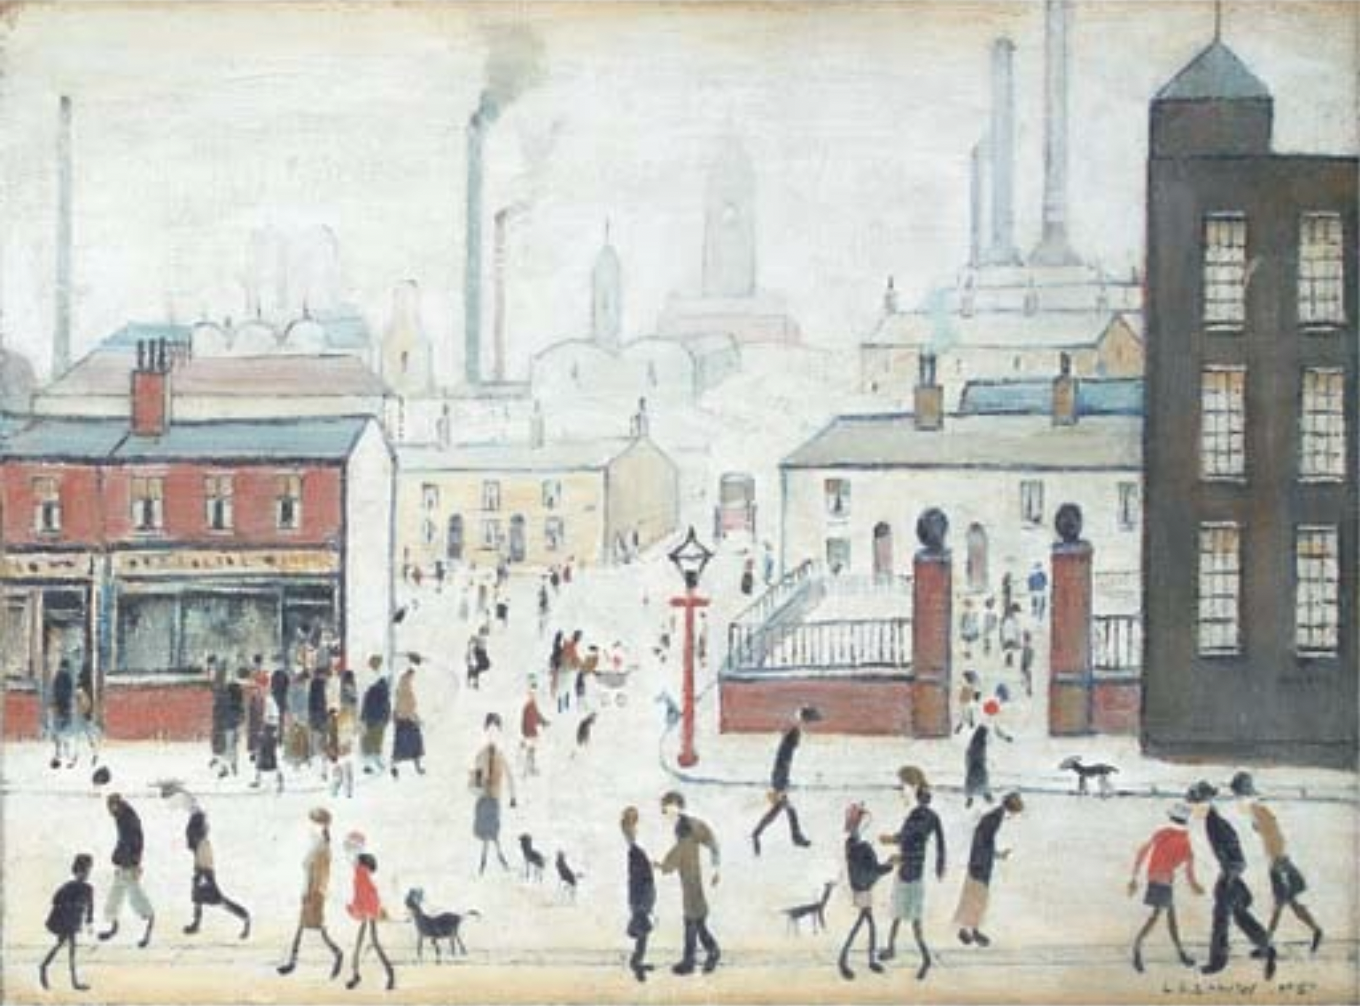 Up North (1957) by Laurence Stephen Lowry (1887 - 1976), English artist.